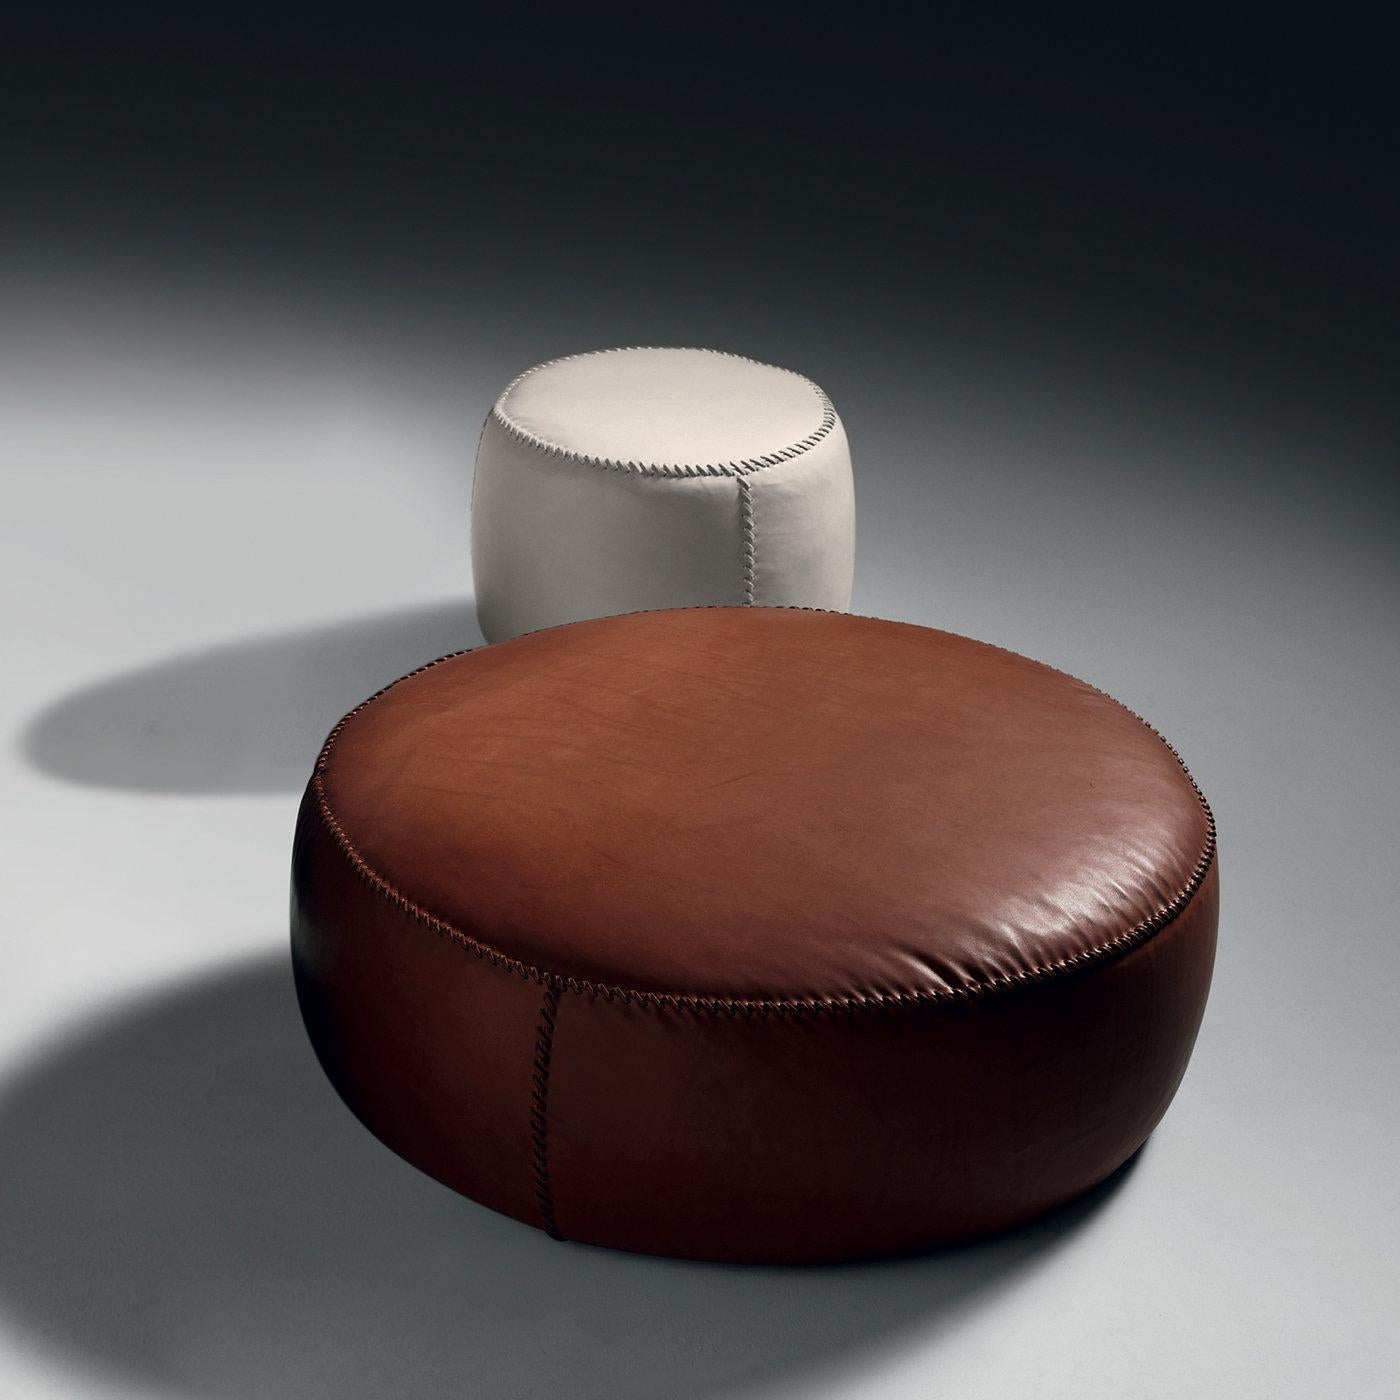 This leather pouf boasts a delicate ivory color that will infuse sophistication in any modern interior. It features a poplar wood structure padded with multi-density and highly-resistant polyurethane foam, combined with 100% European goose feathers